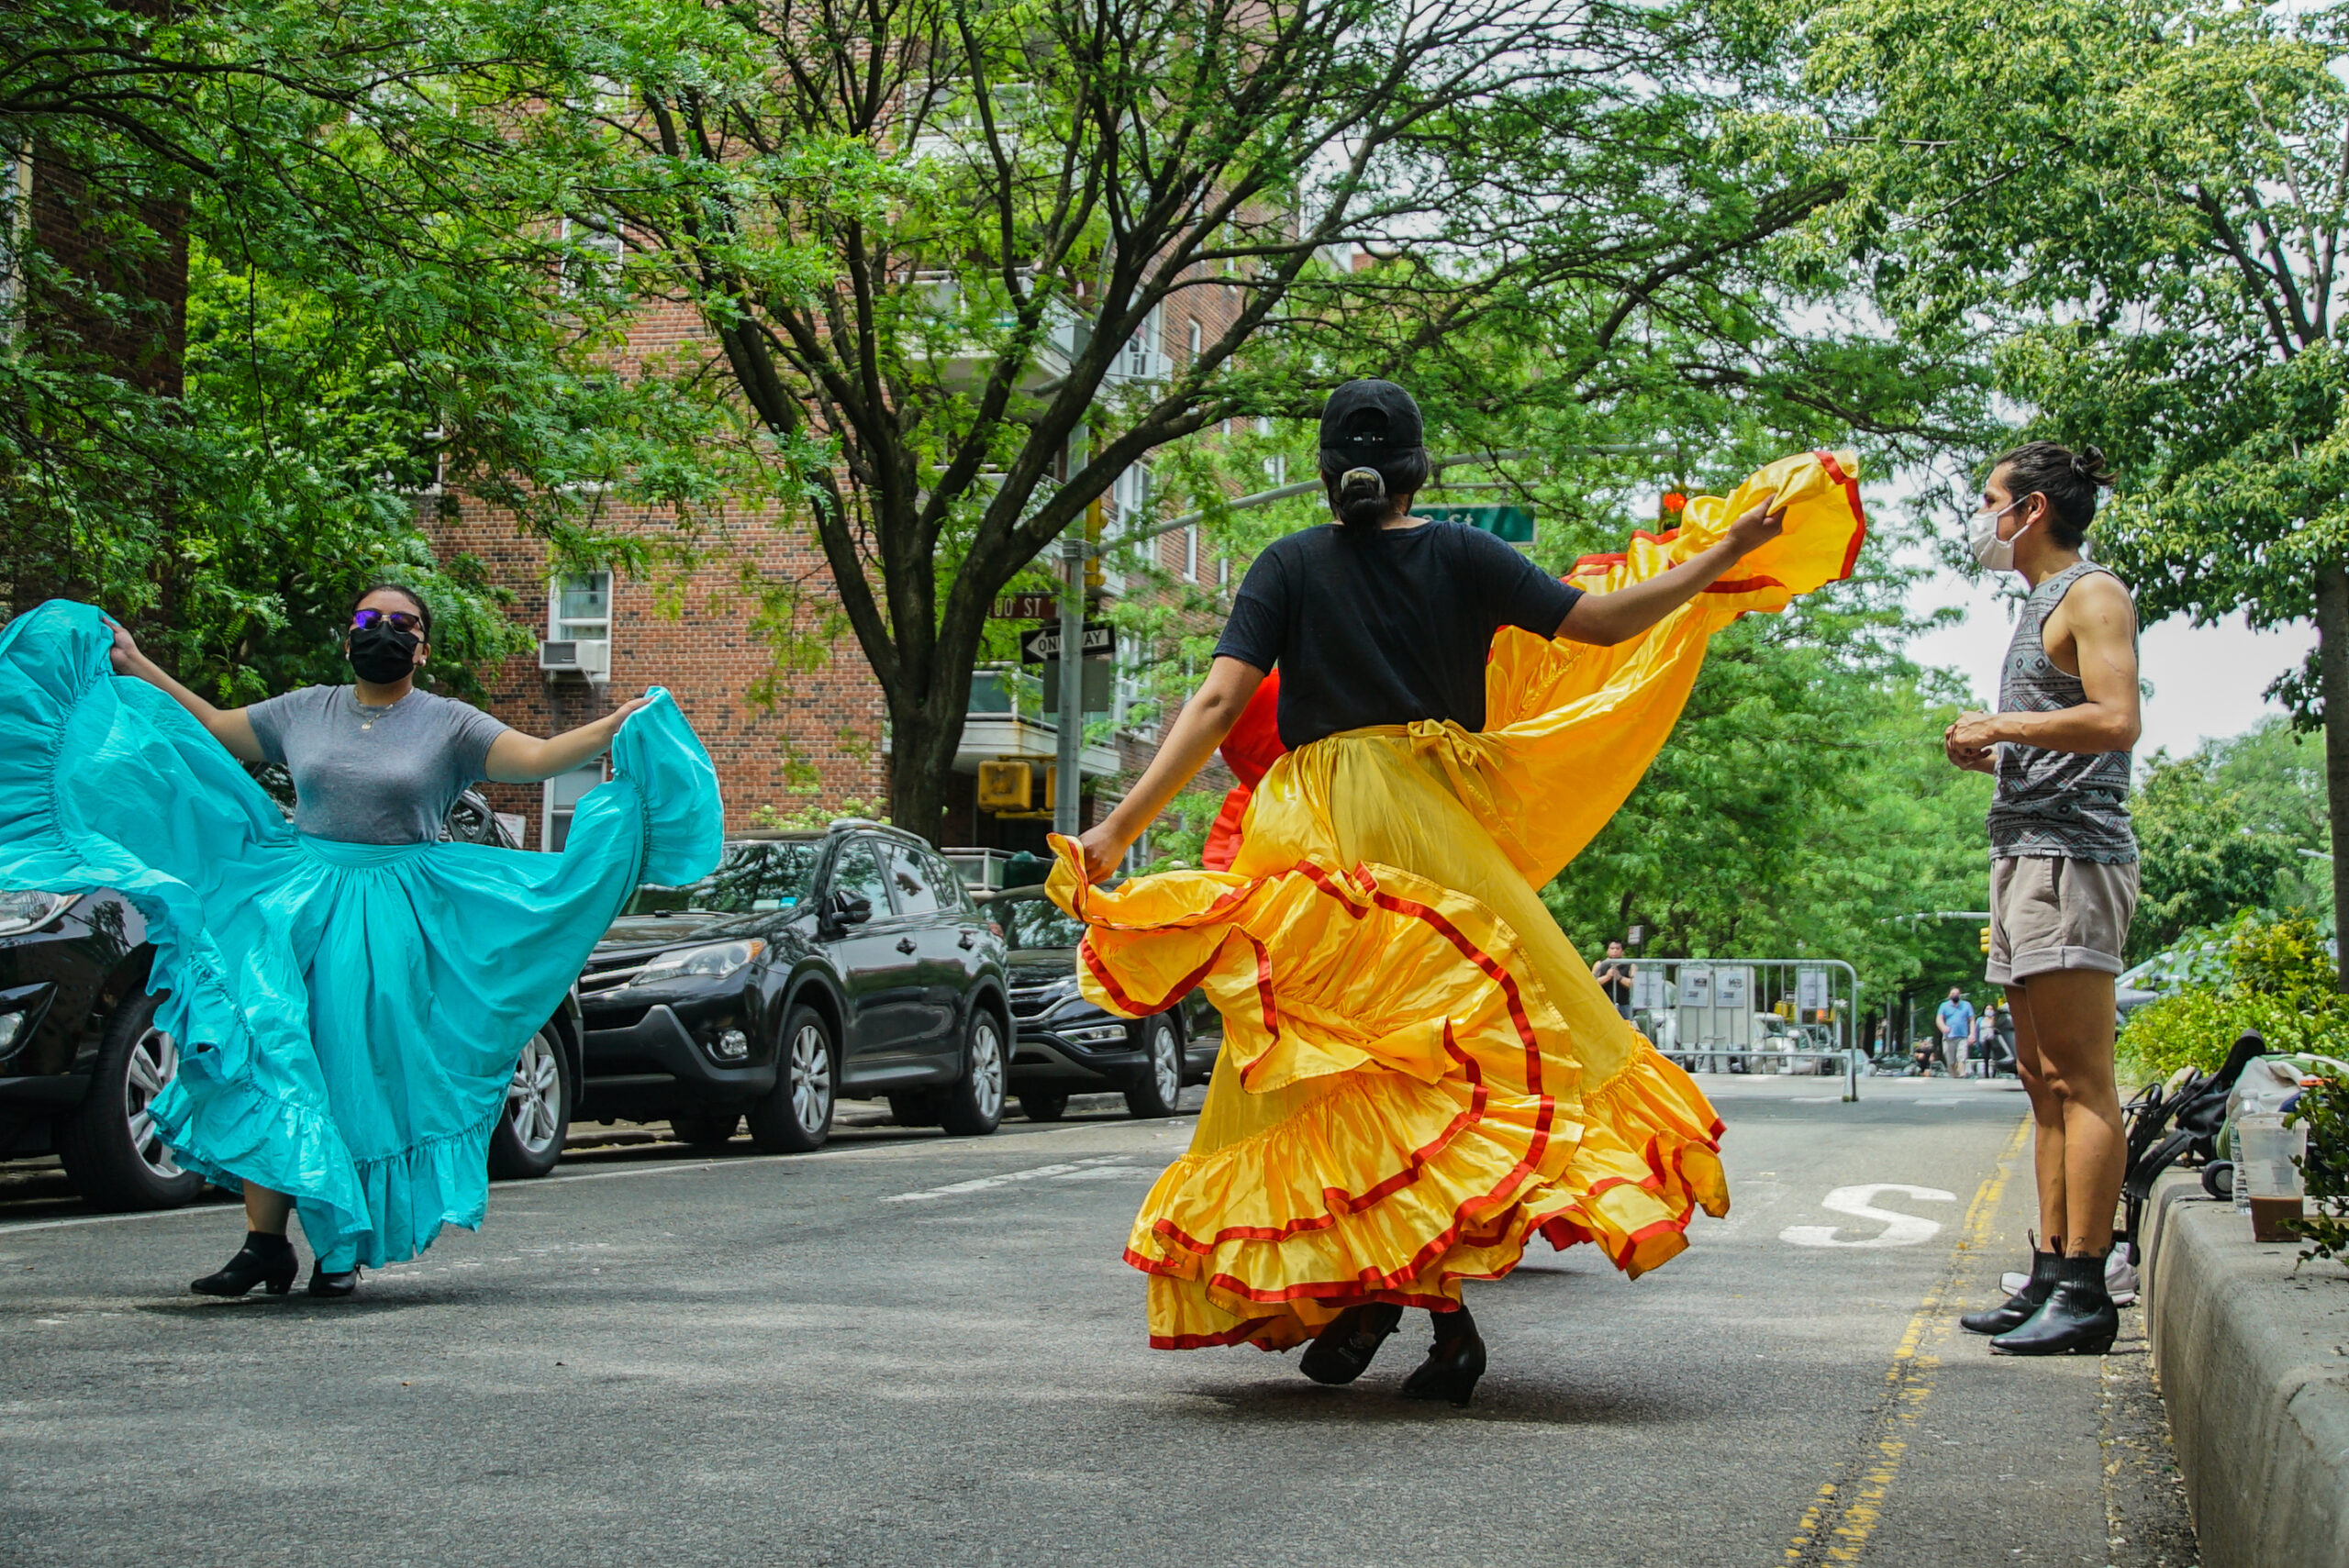 Rehearsing on 34th Avenue, dancers swirl their skirts as they practice movements.